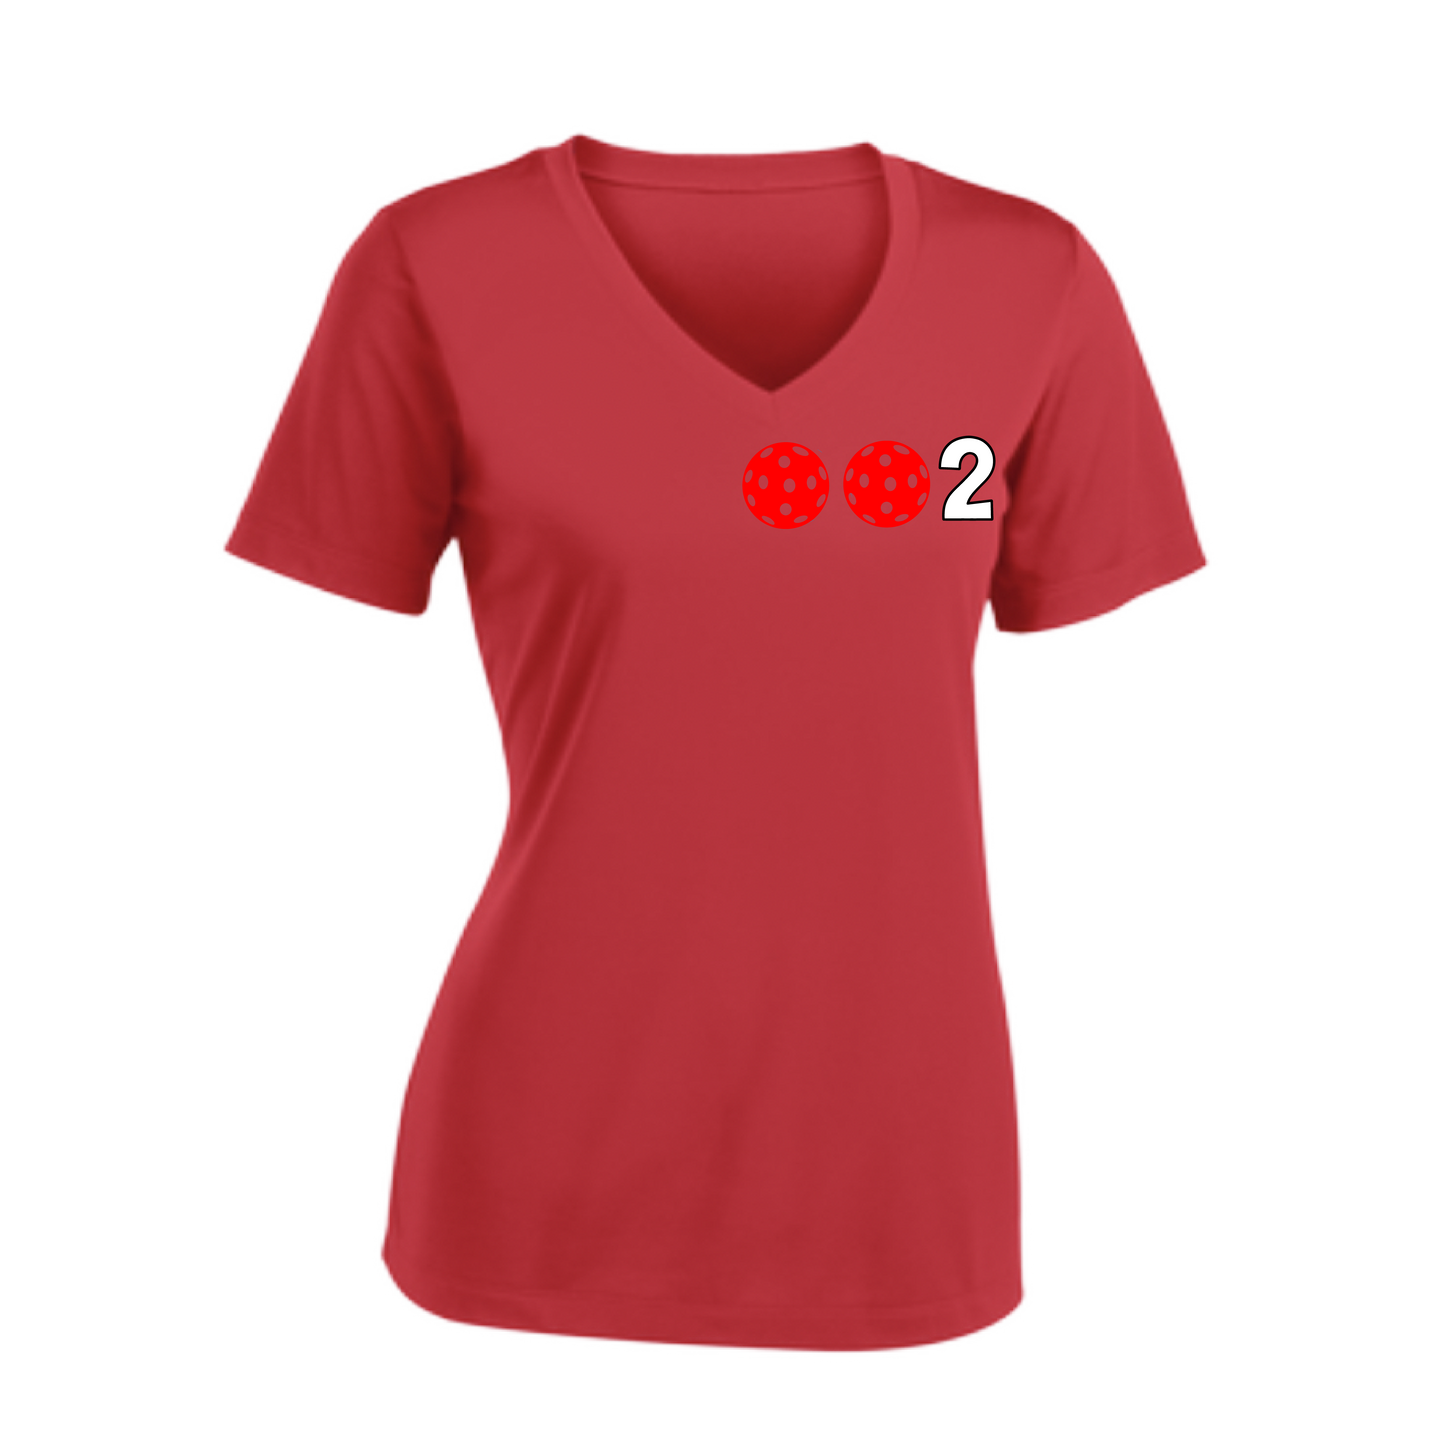 002 With Pickleballs (Colors Rainbow Red Cyan) Customizable | Women's Short Sleeve V-Neck Pickleball Shirts | 100% Polyester